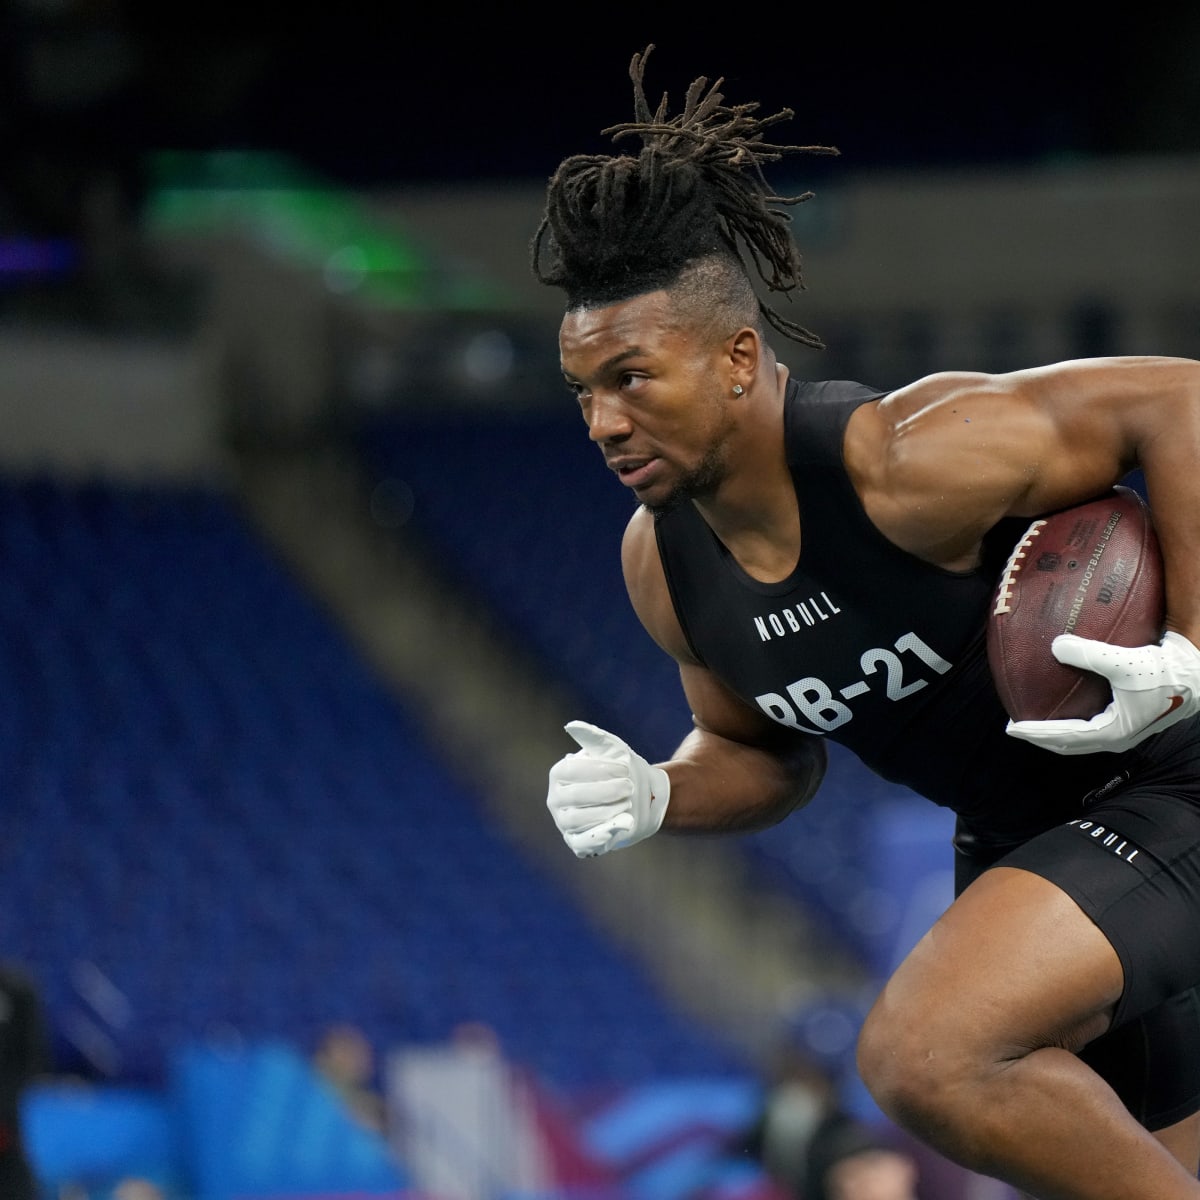 NFL Combine Collection – NOBULL